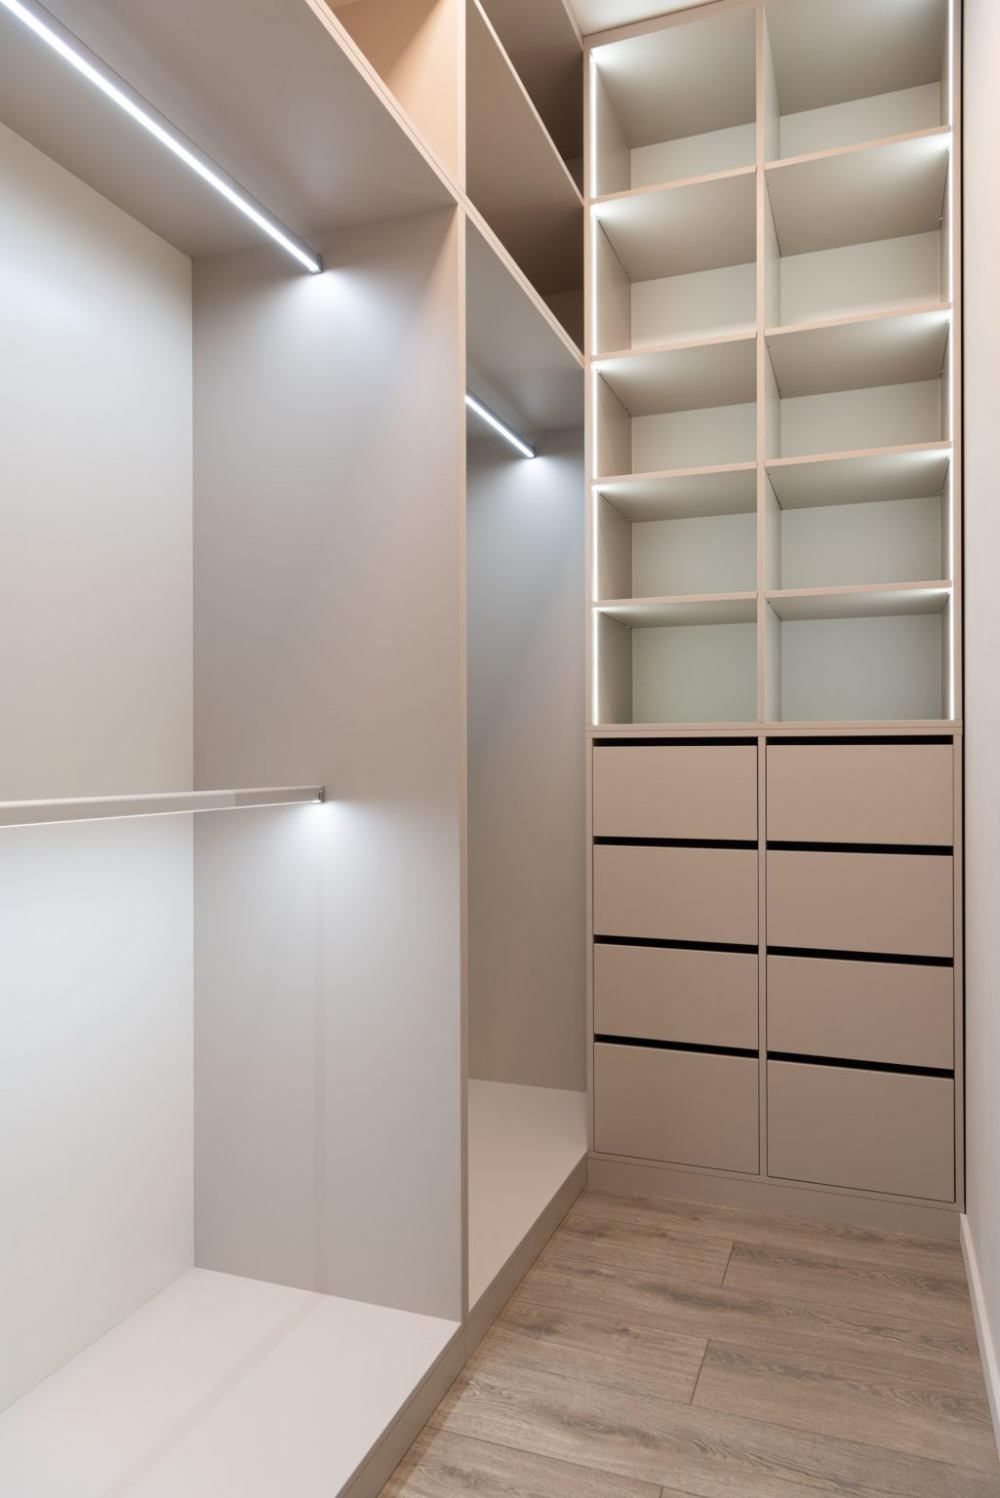 Trendy Walk-in Closet Ideas to Elevate
Your Home